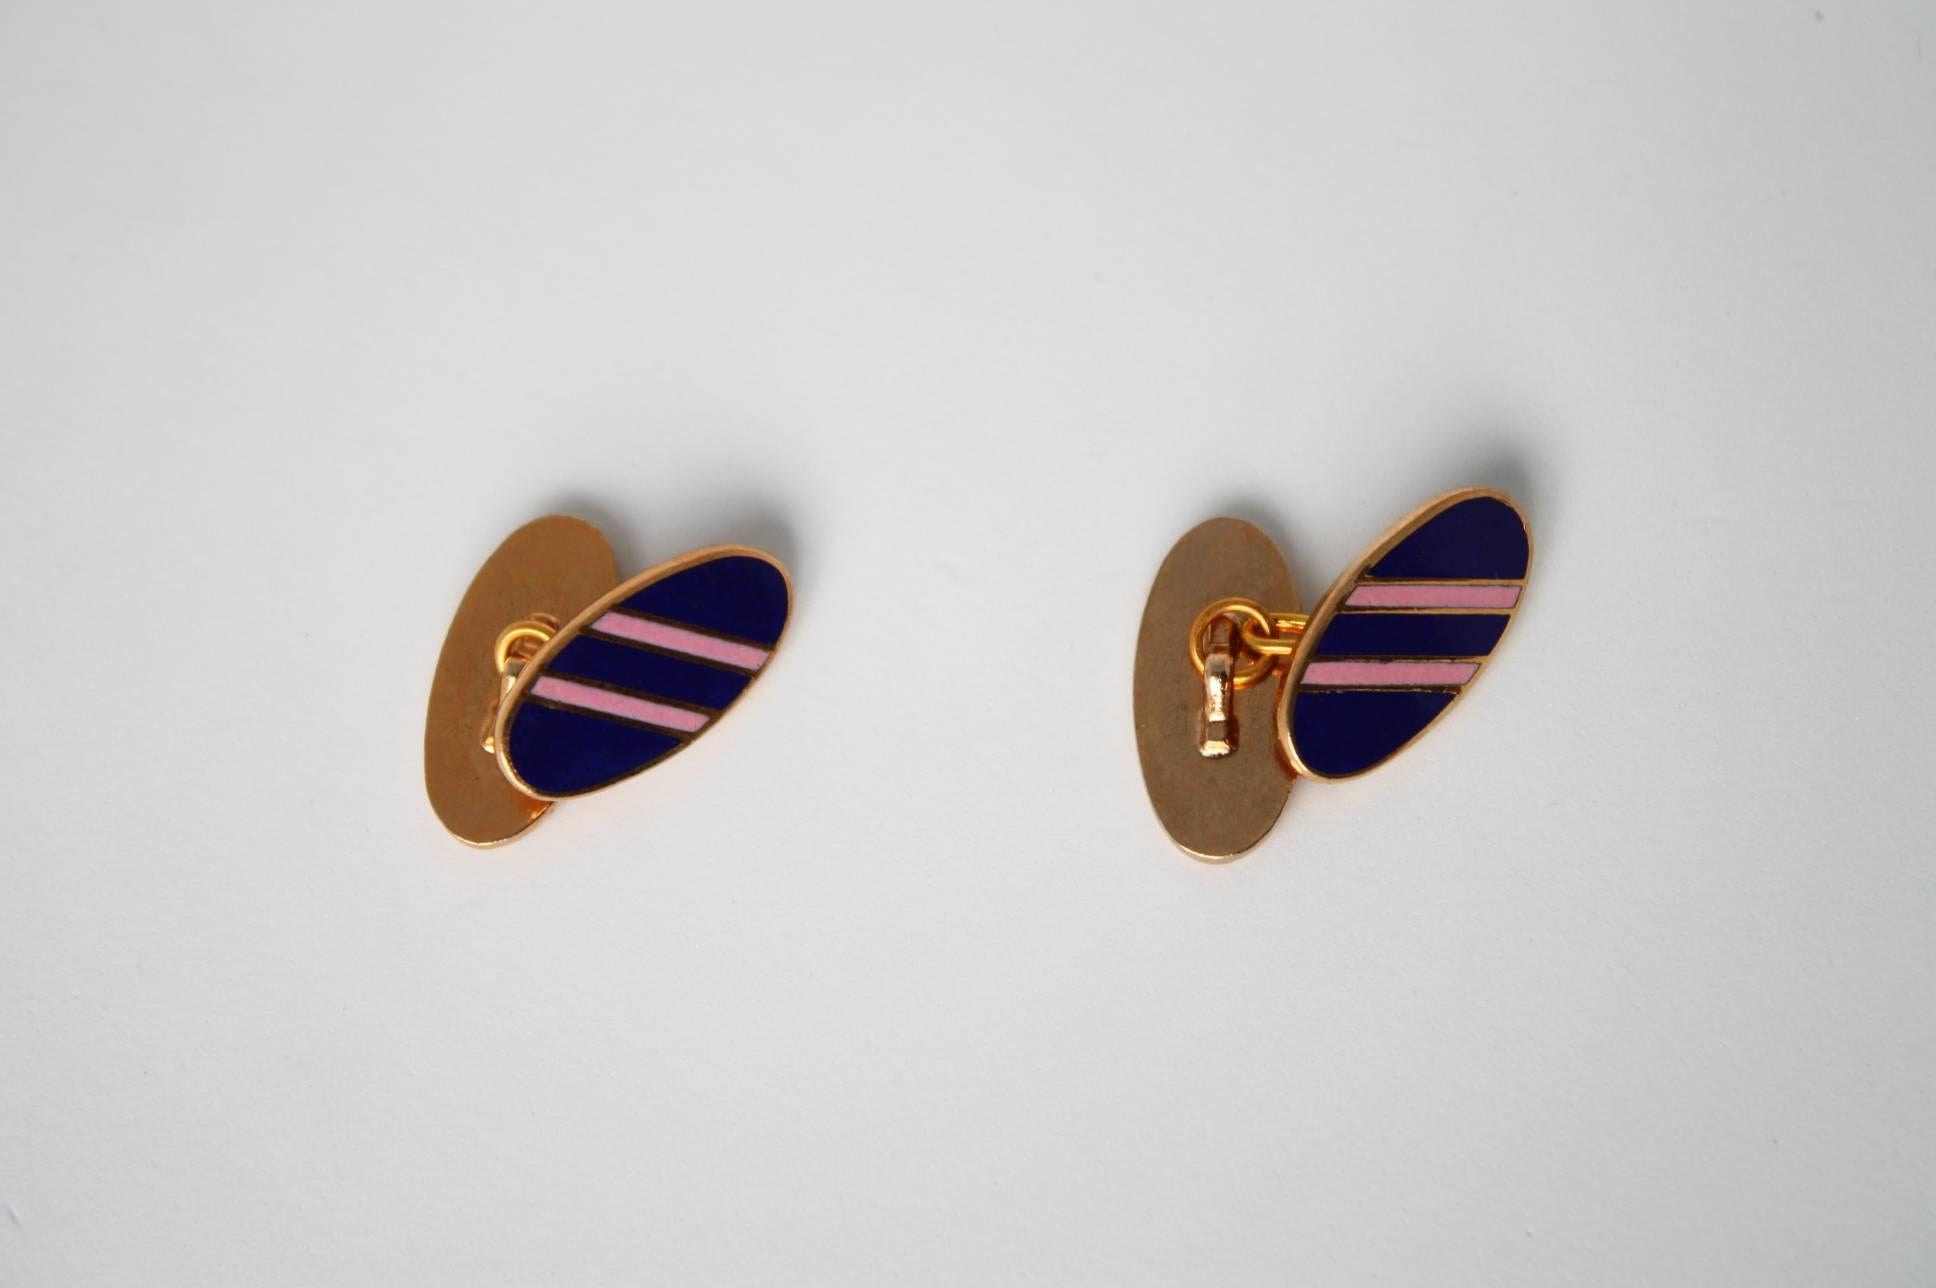 French Cufflinks  enamel blu and rose stripes gold plate. Measures 2 cm length weight 5gr each.
All Giulia Colussi jewelry is new and has never been previously owned or worn. Each item will arrive at your door beautifully gift wrapped in our boxes,